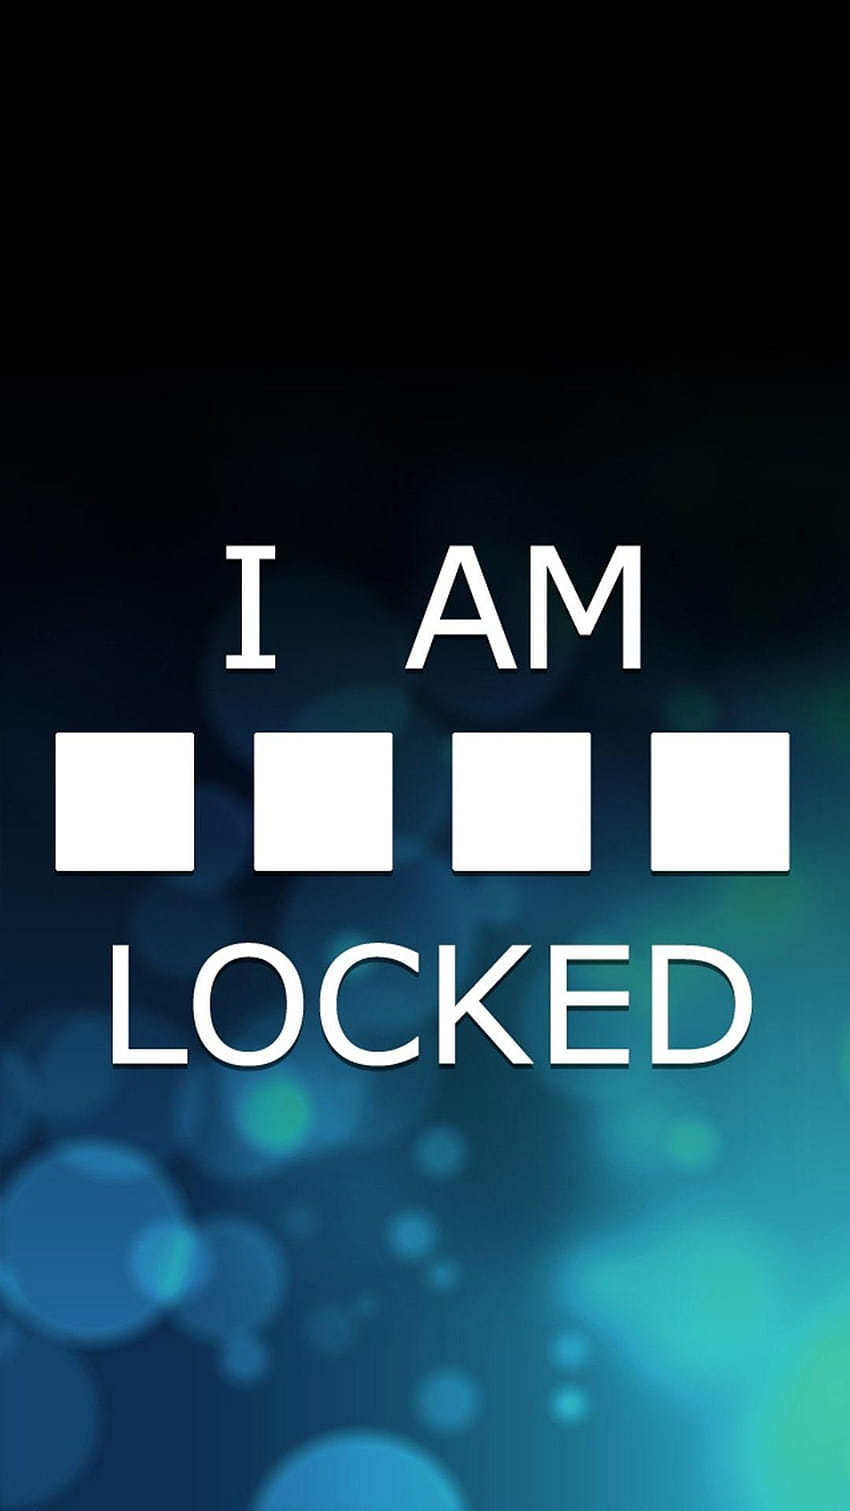 I Am Locked 1080 x 1920 available for, im locked for a reason iphone HD phone wallpaper